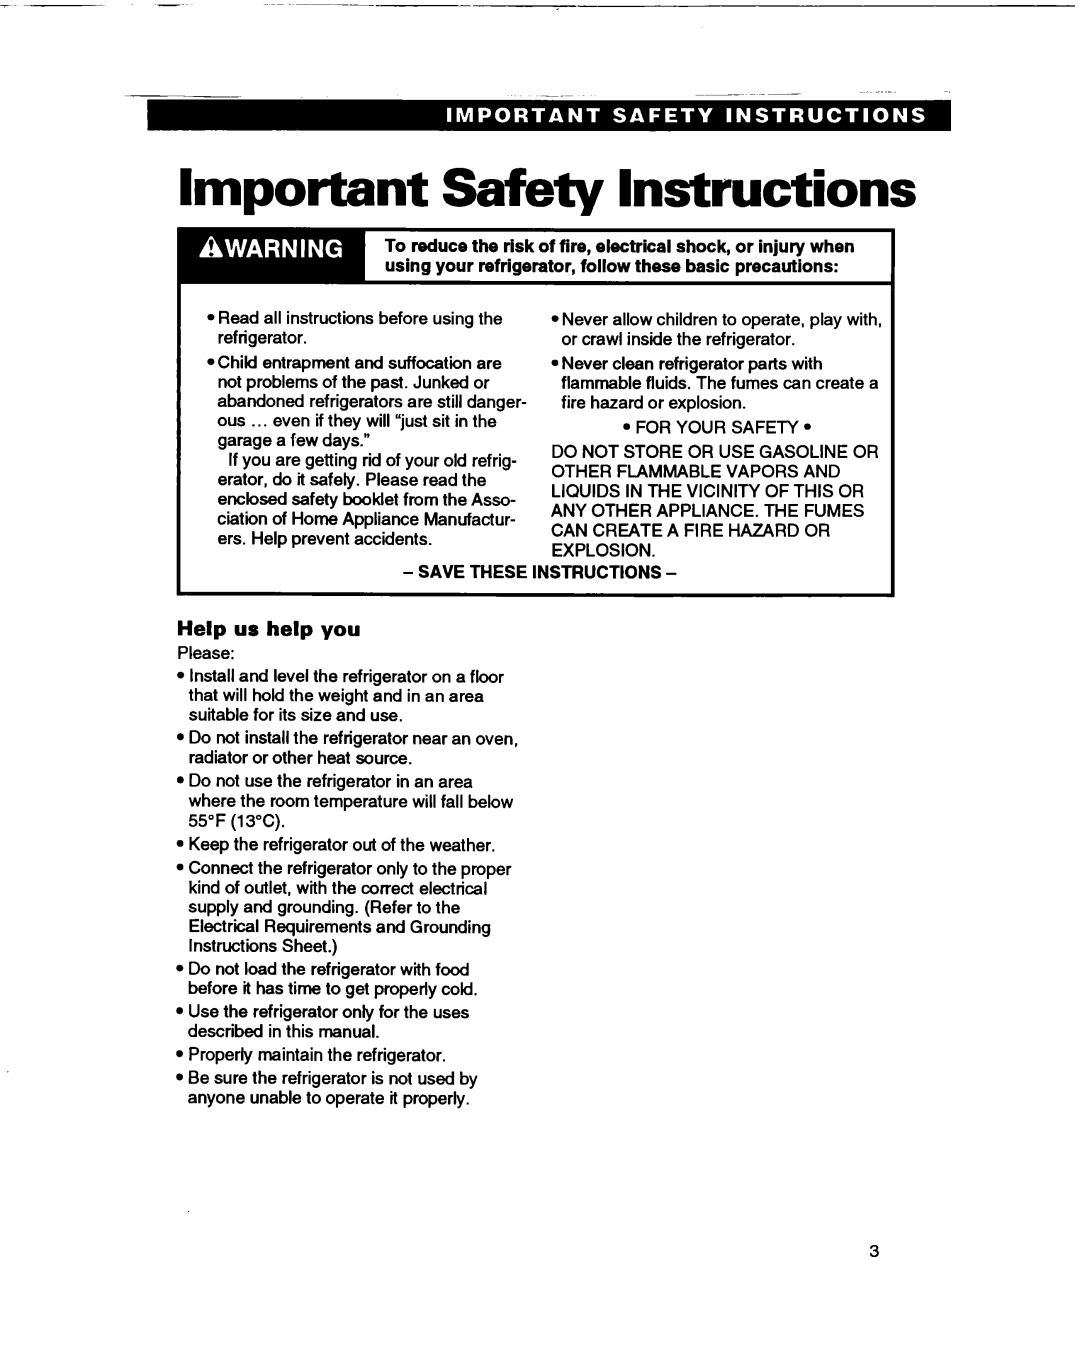 Whirlpool ETl4HJ, ET14GK warranty Imraortant Safetv Instructions, Help us help you, Save These Instructions 